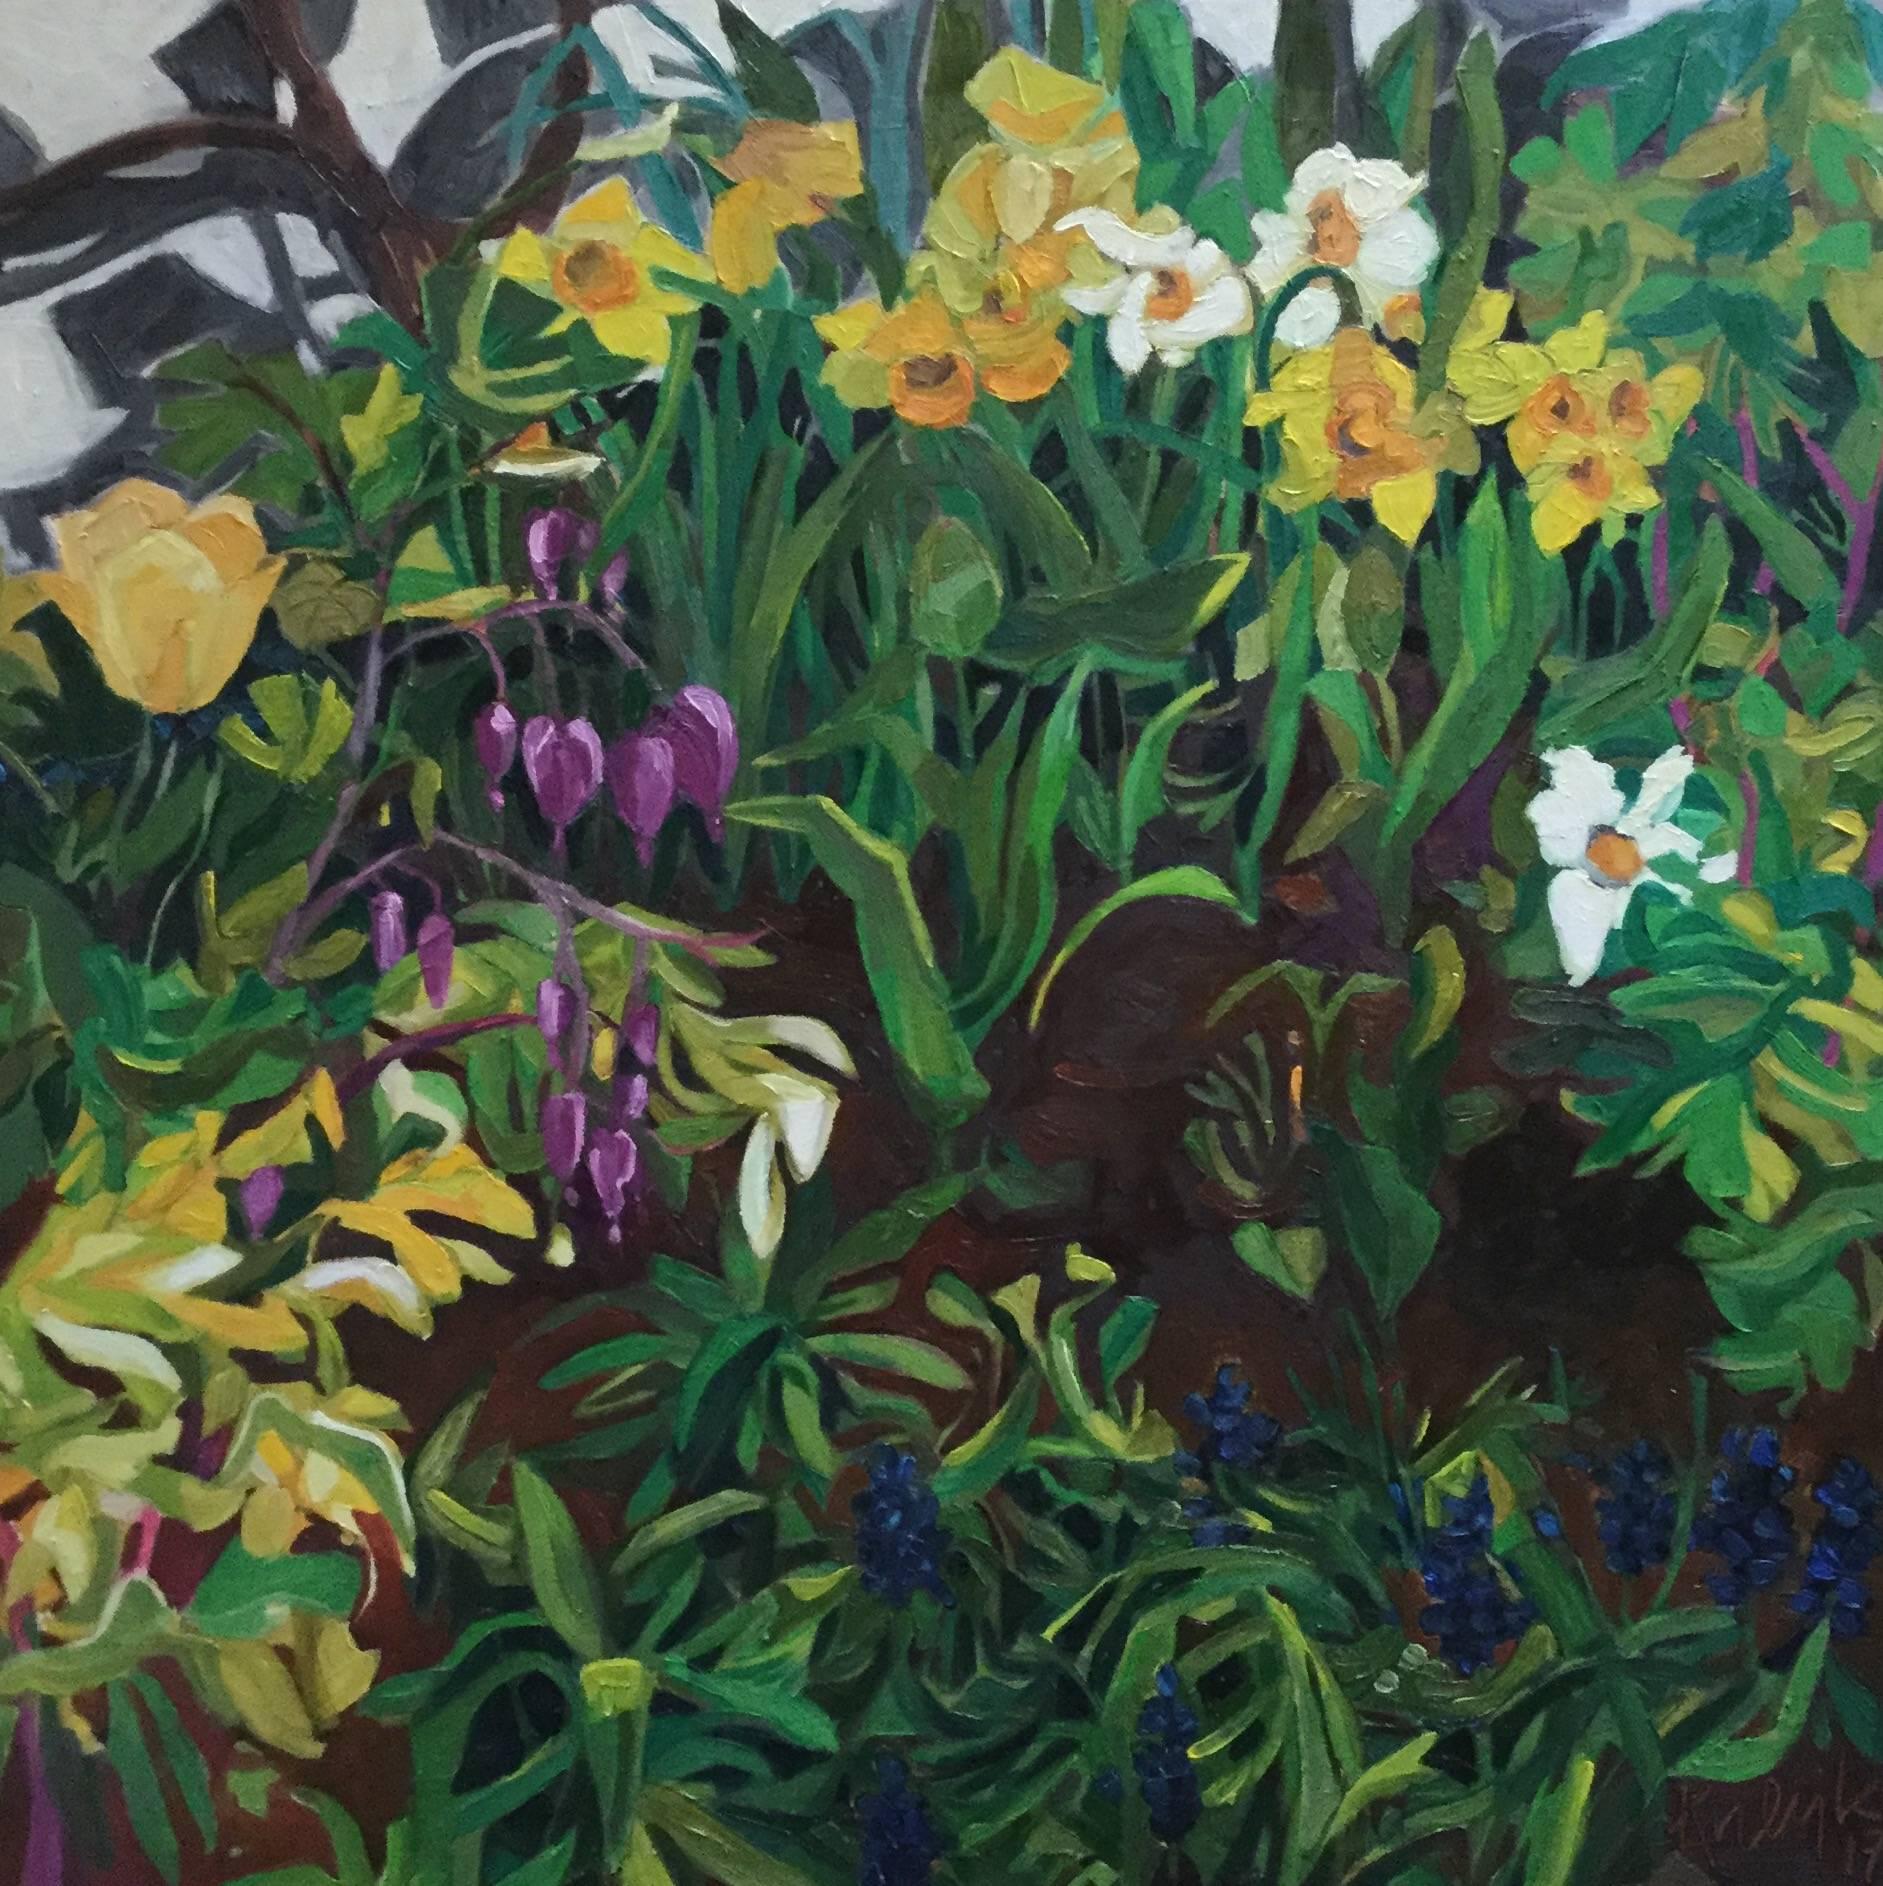 Karen Kulyk Figurative Painting - Spring Garden by the Wall, floral oil painting on canvas